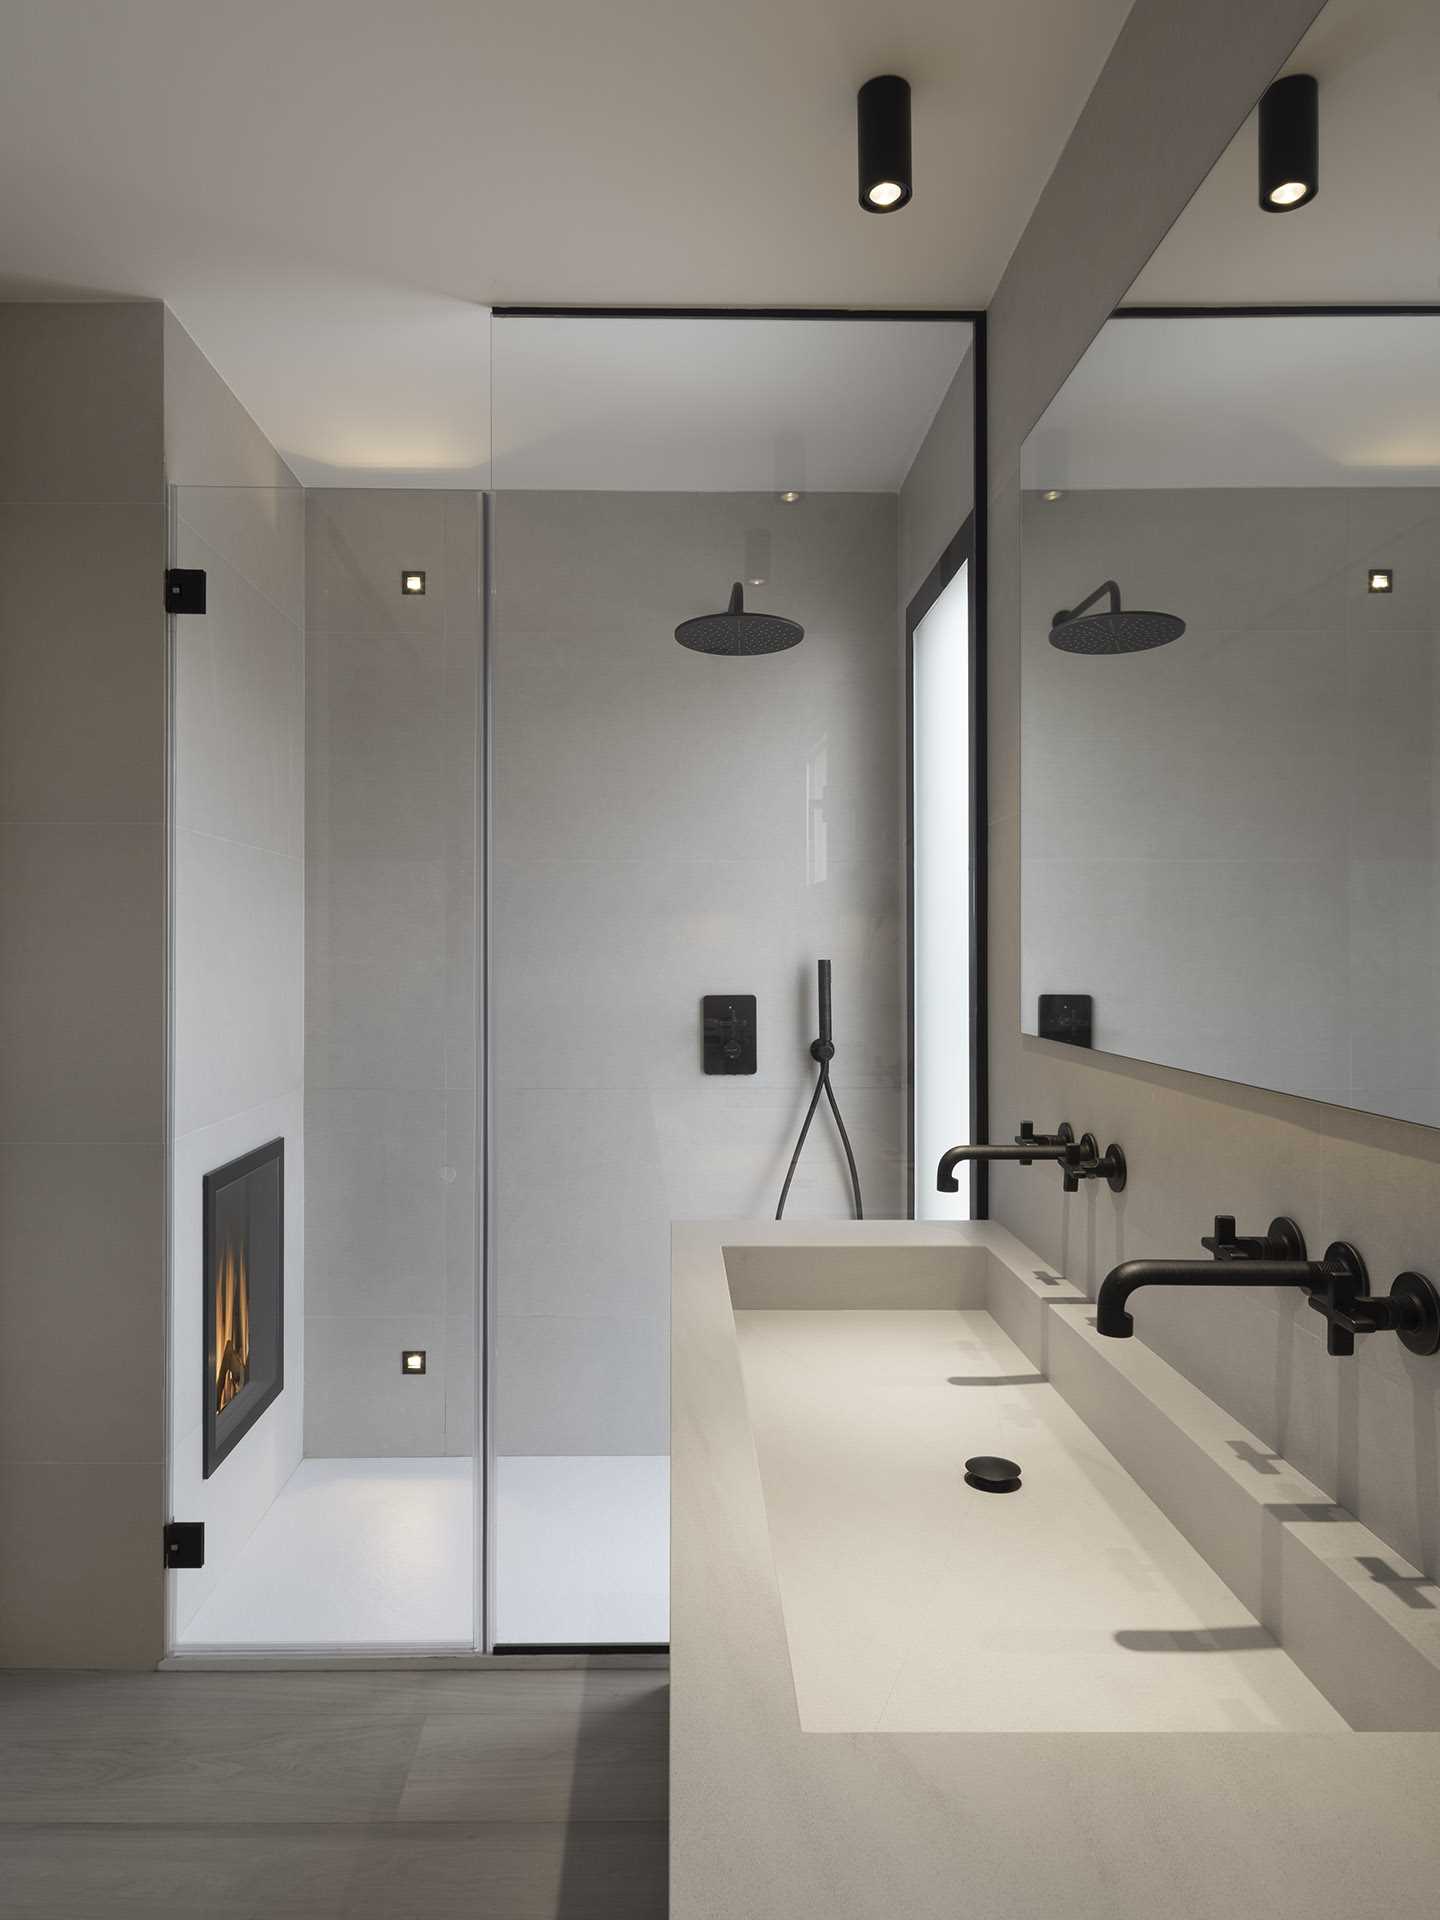 A modern bathroom with a fireplace in the shower.